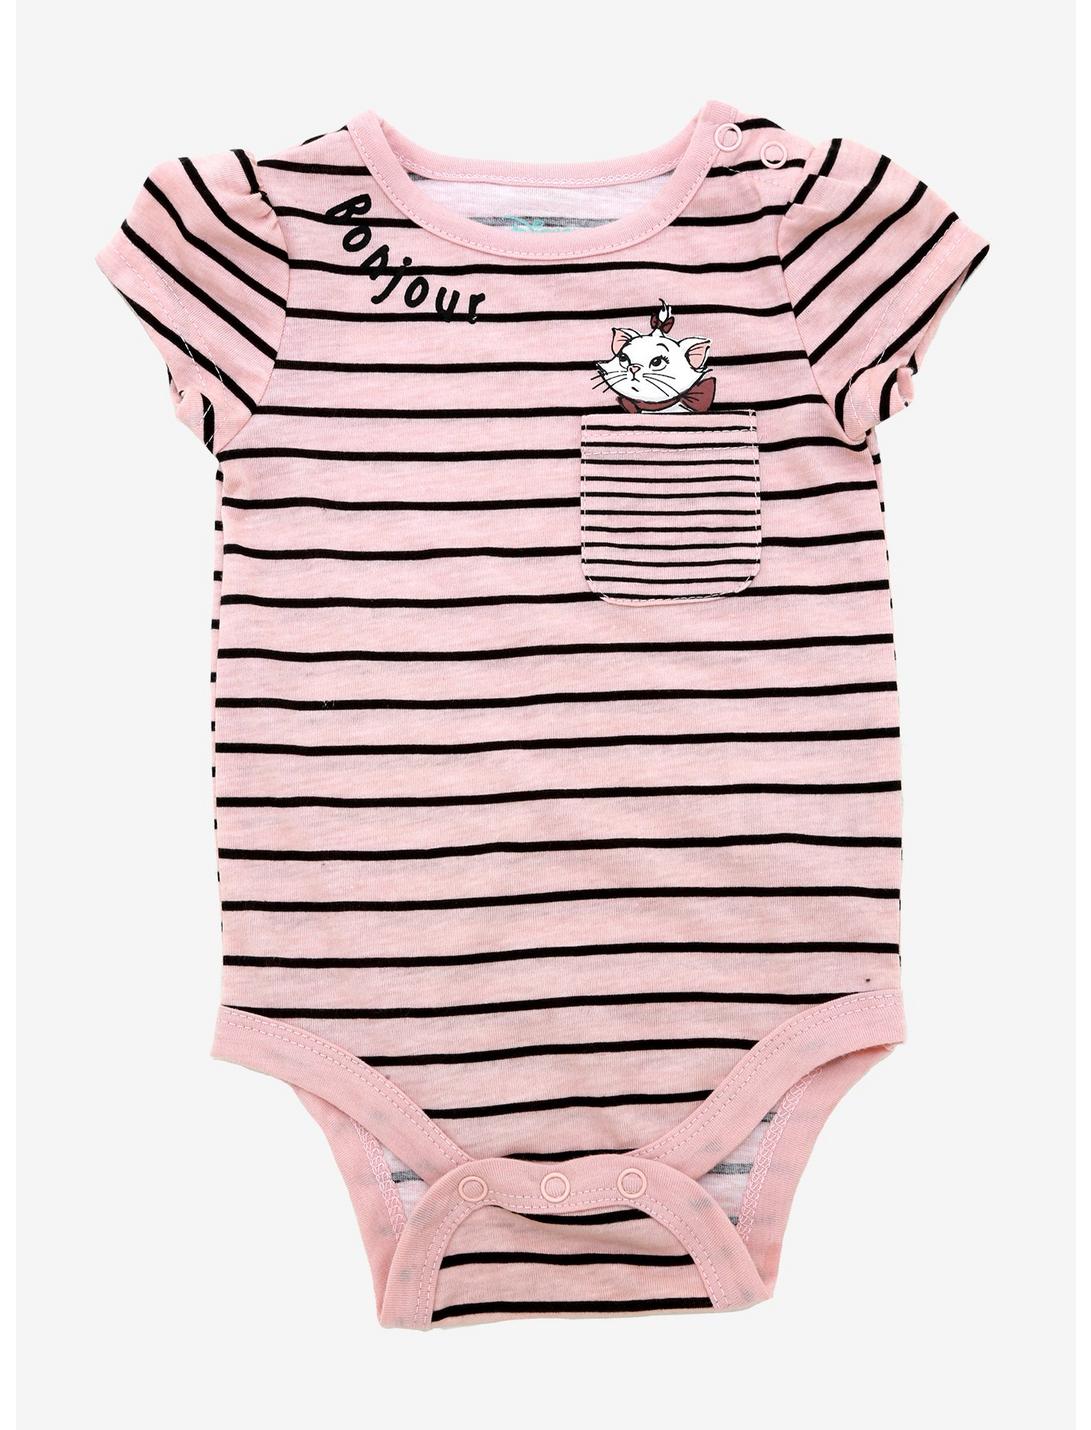 Disney The Aristocats Pink Striped Infant Bodysuit - BoxLunch Exclusive, PINK, hi-res